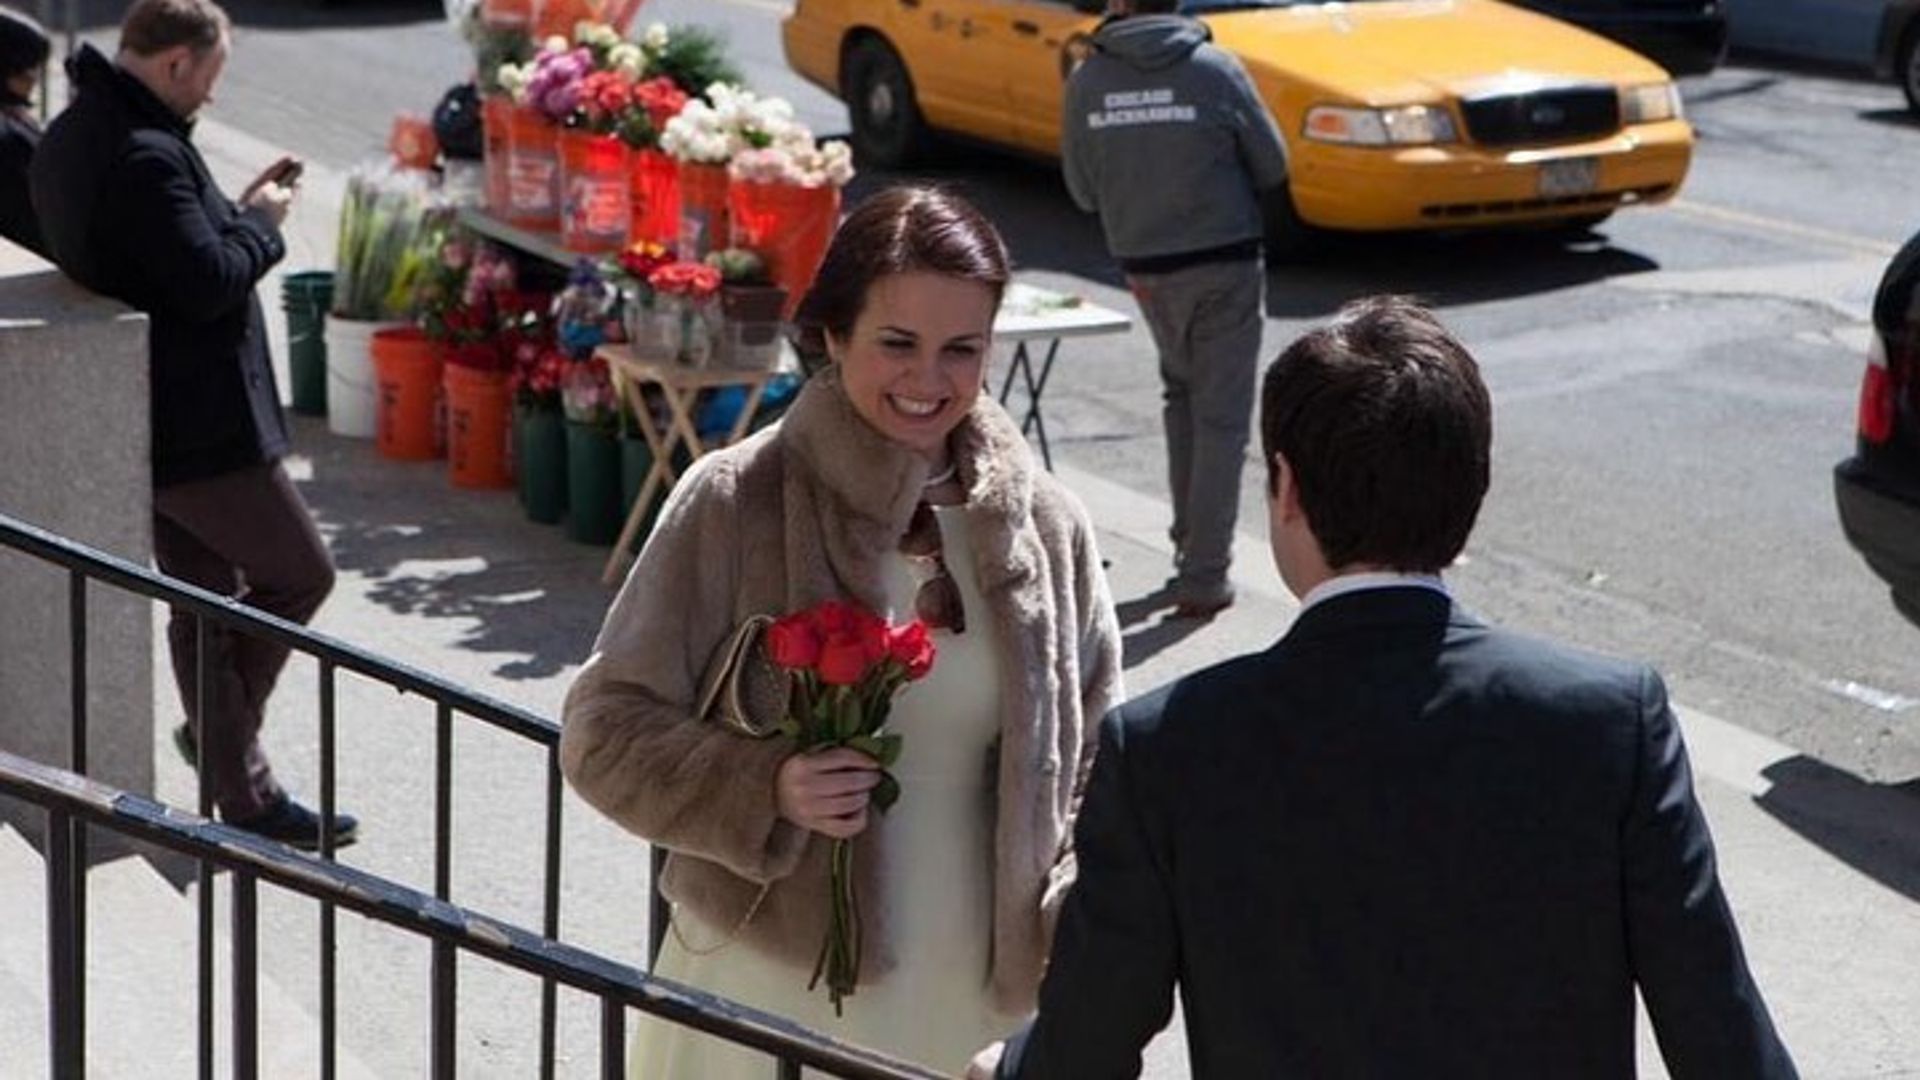 Nina Warhurst holding red roses and wearing a white dress and fur coat on her wedding day in New York